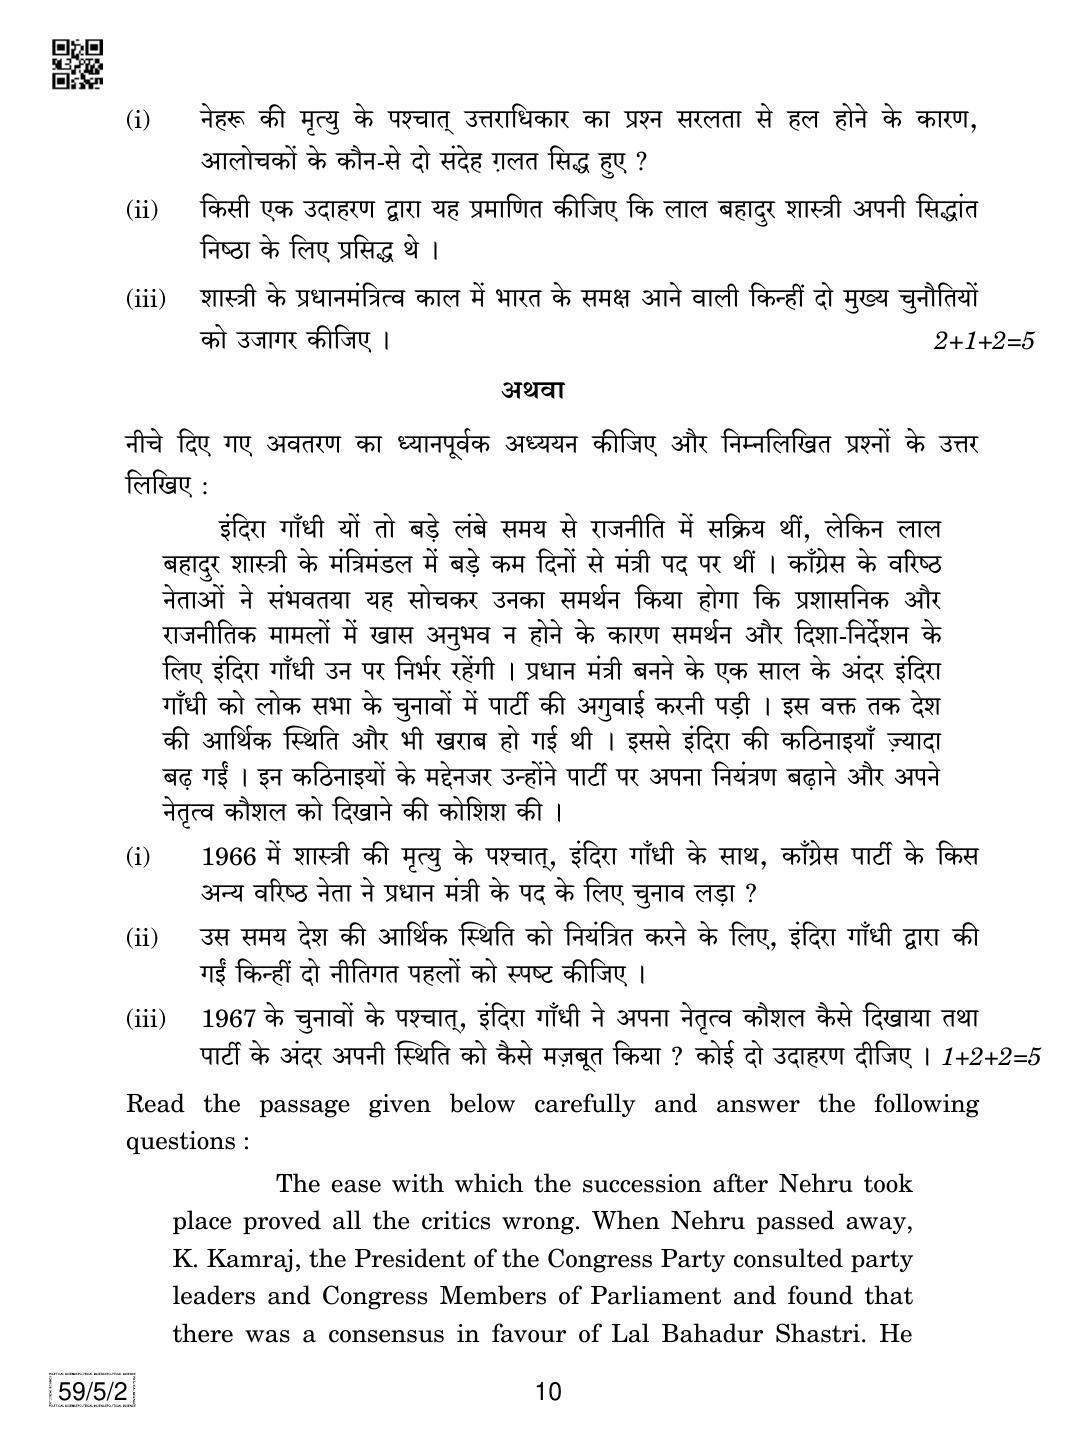 CBSE Class 12 59-5-2 Political Science 2019 Question Paper - Page 10